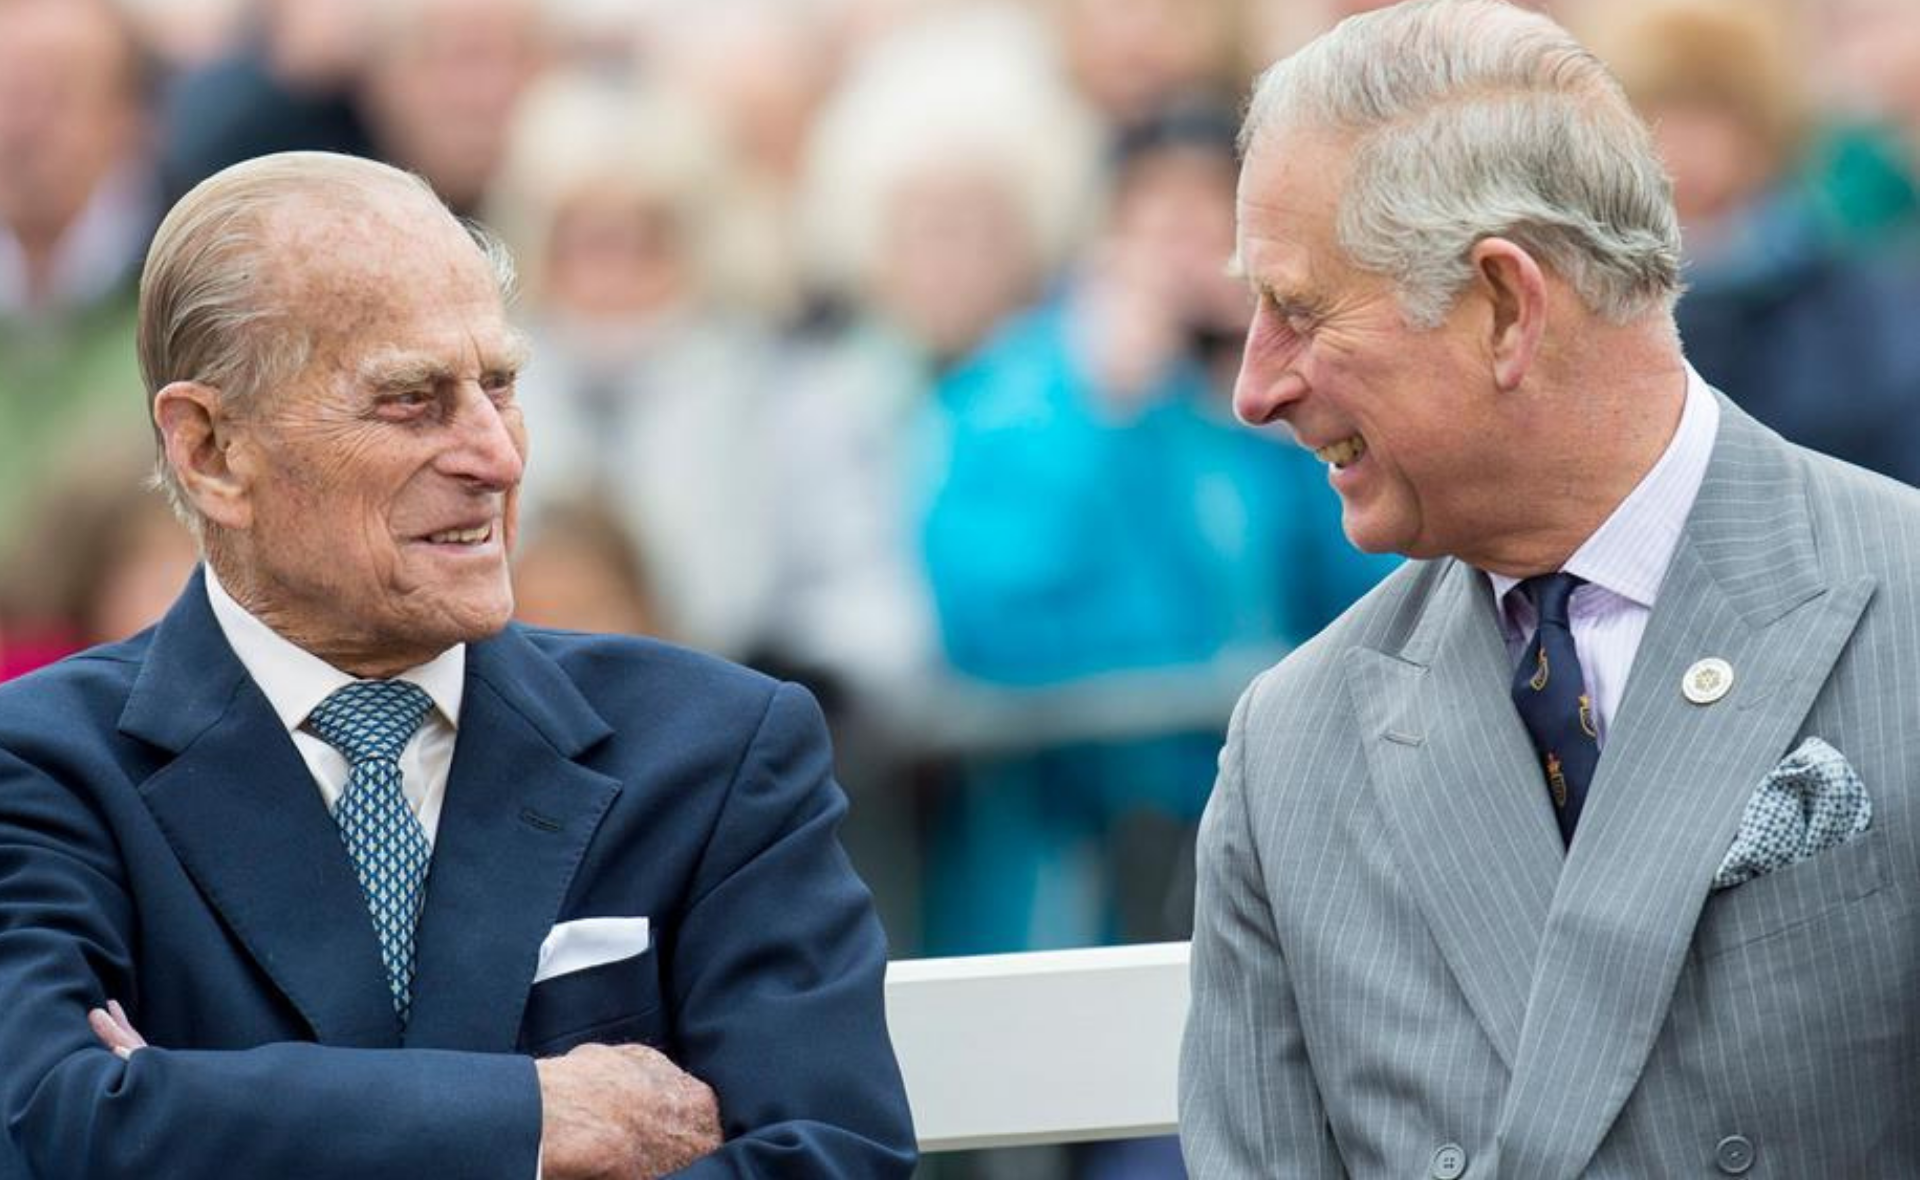 Prince Charles shares rare vintage photo with his late father, Prince Philip, in touching thank you card to fans